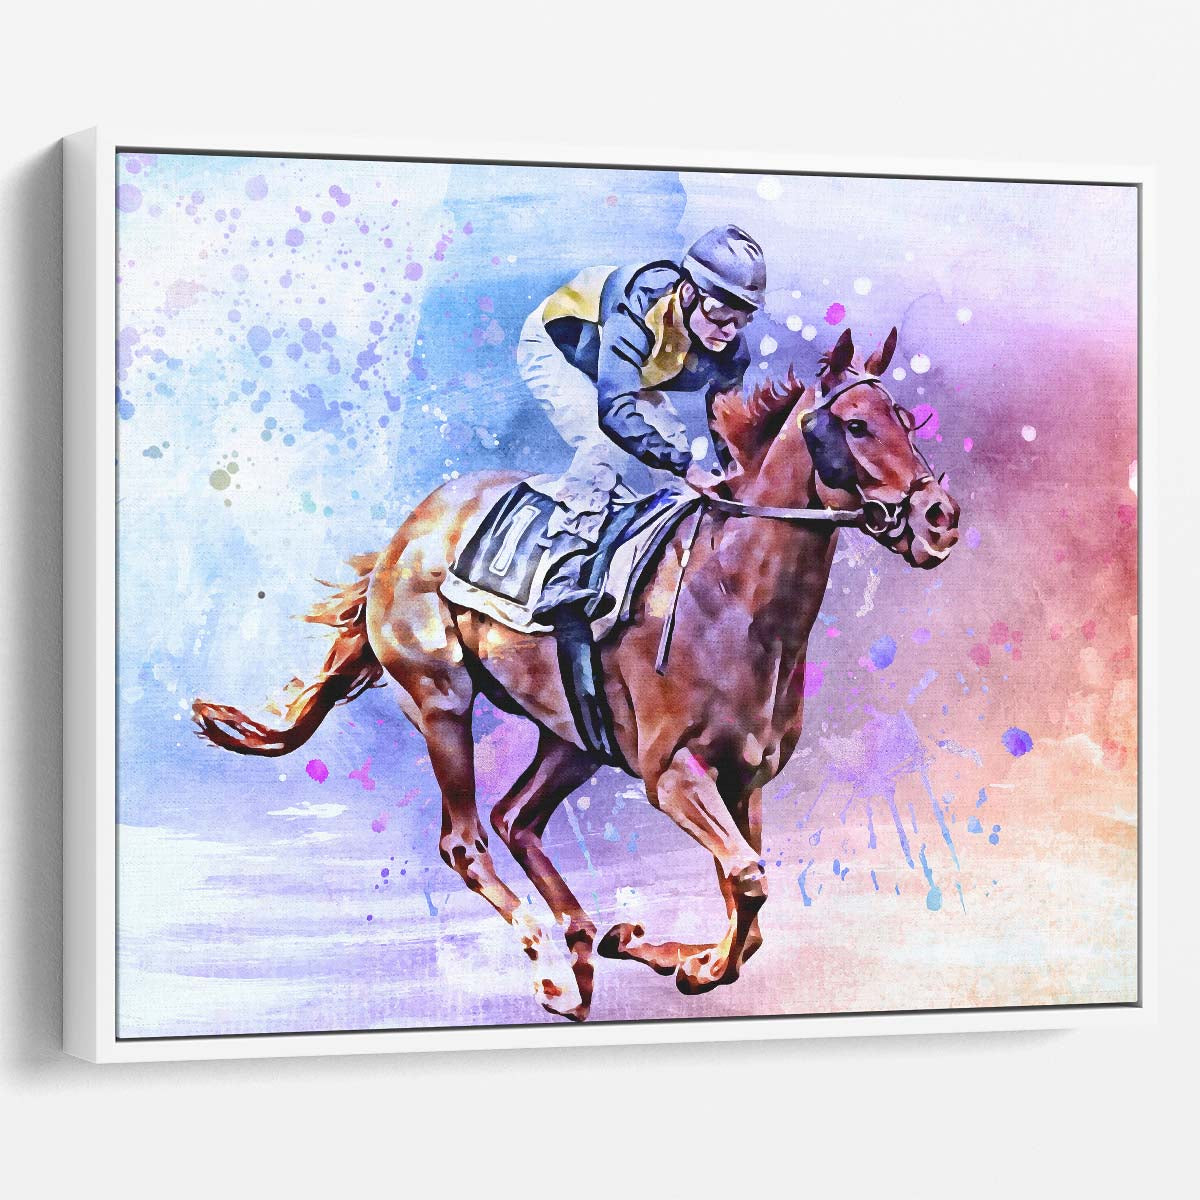 Horse Racing Gallop Watercolor Painting Wall Art by Luxuriance Designs. Made in USA.